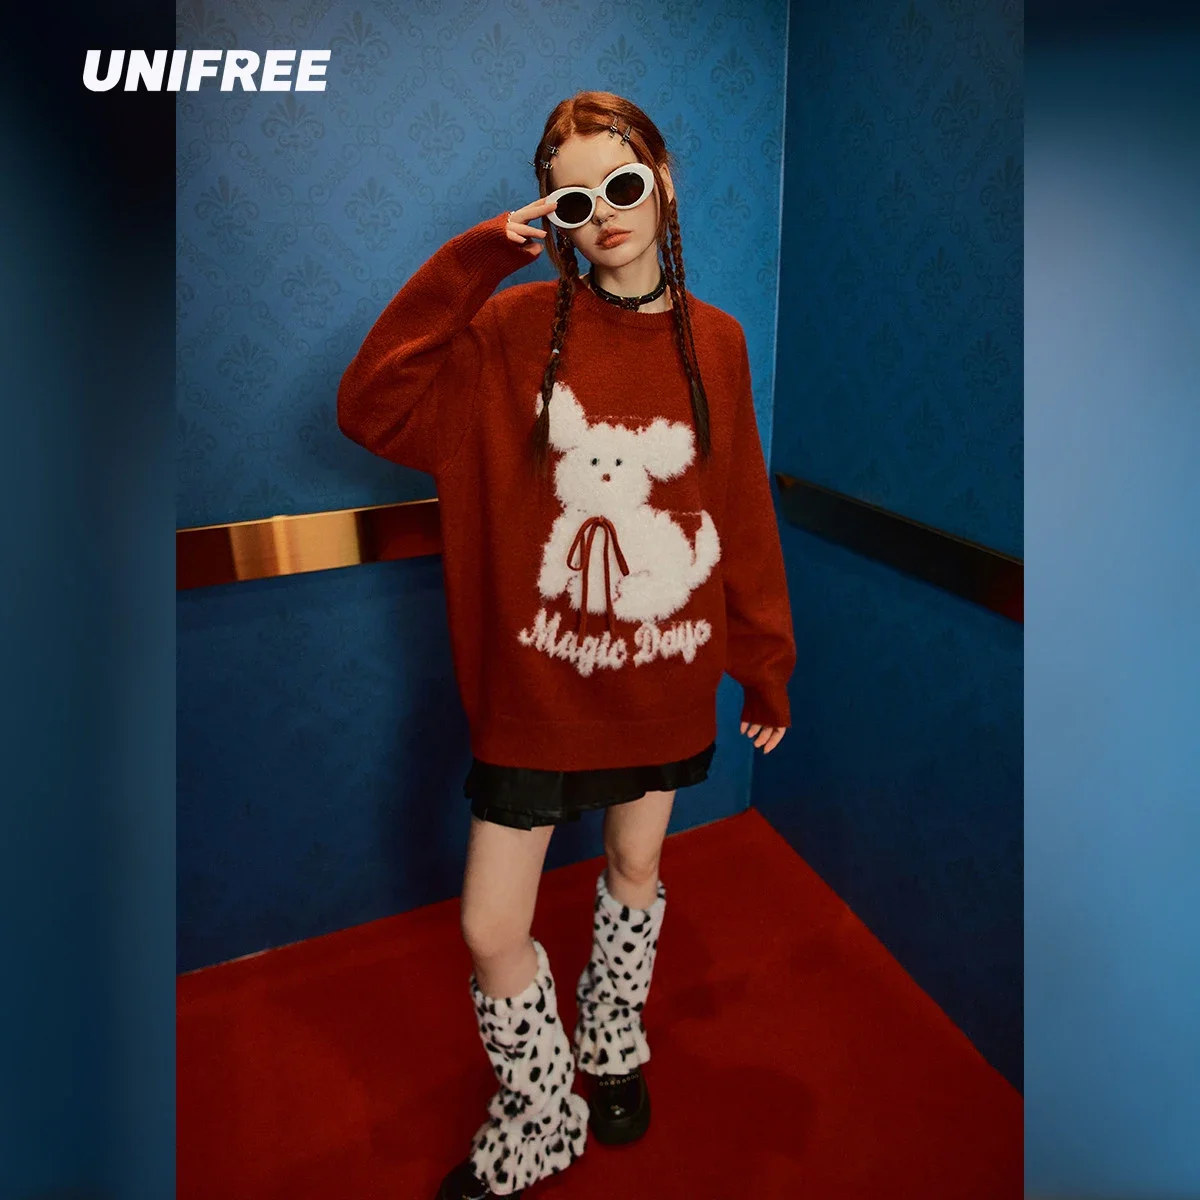 

UNIFREE Cute Cartoon Red Sweaters Women Sweet Casuals Loose O-neck Knitted Pullovers Harajuku Winter Warm Sweater